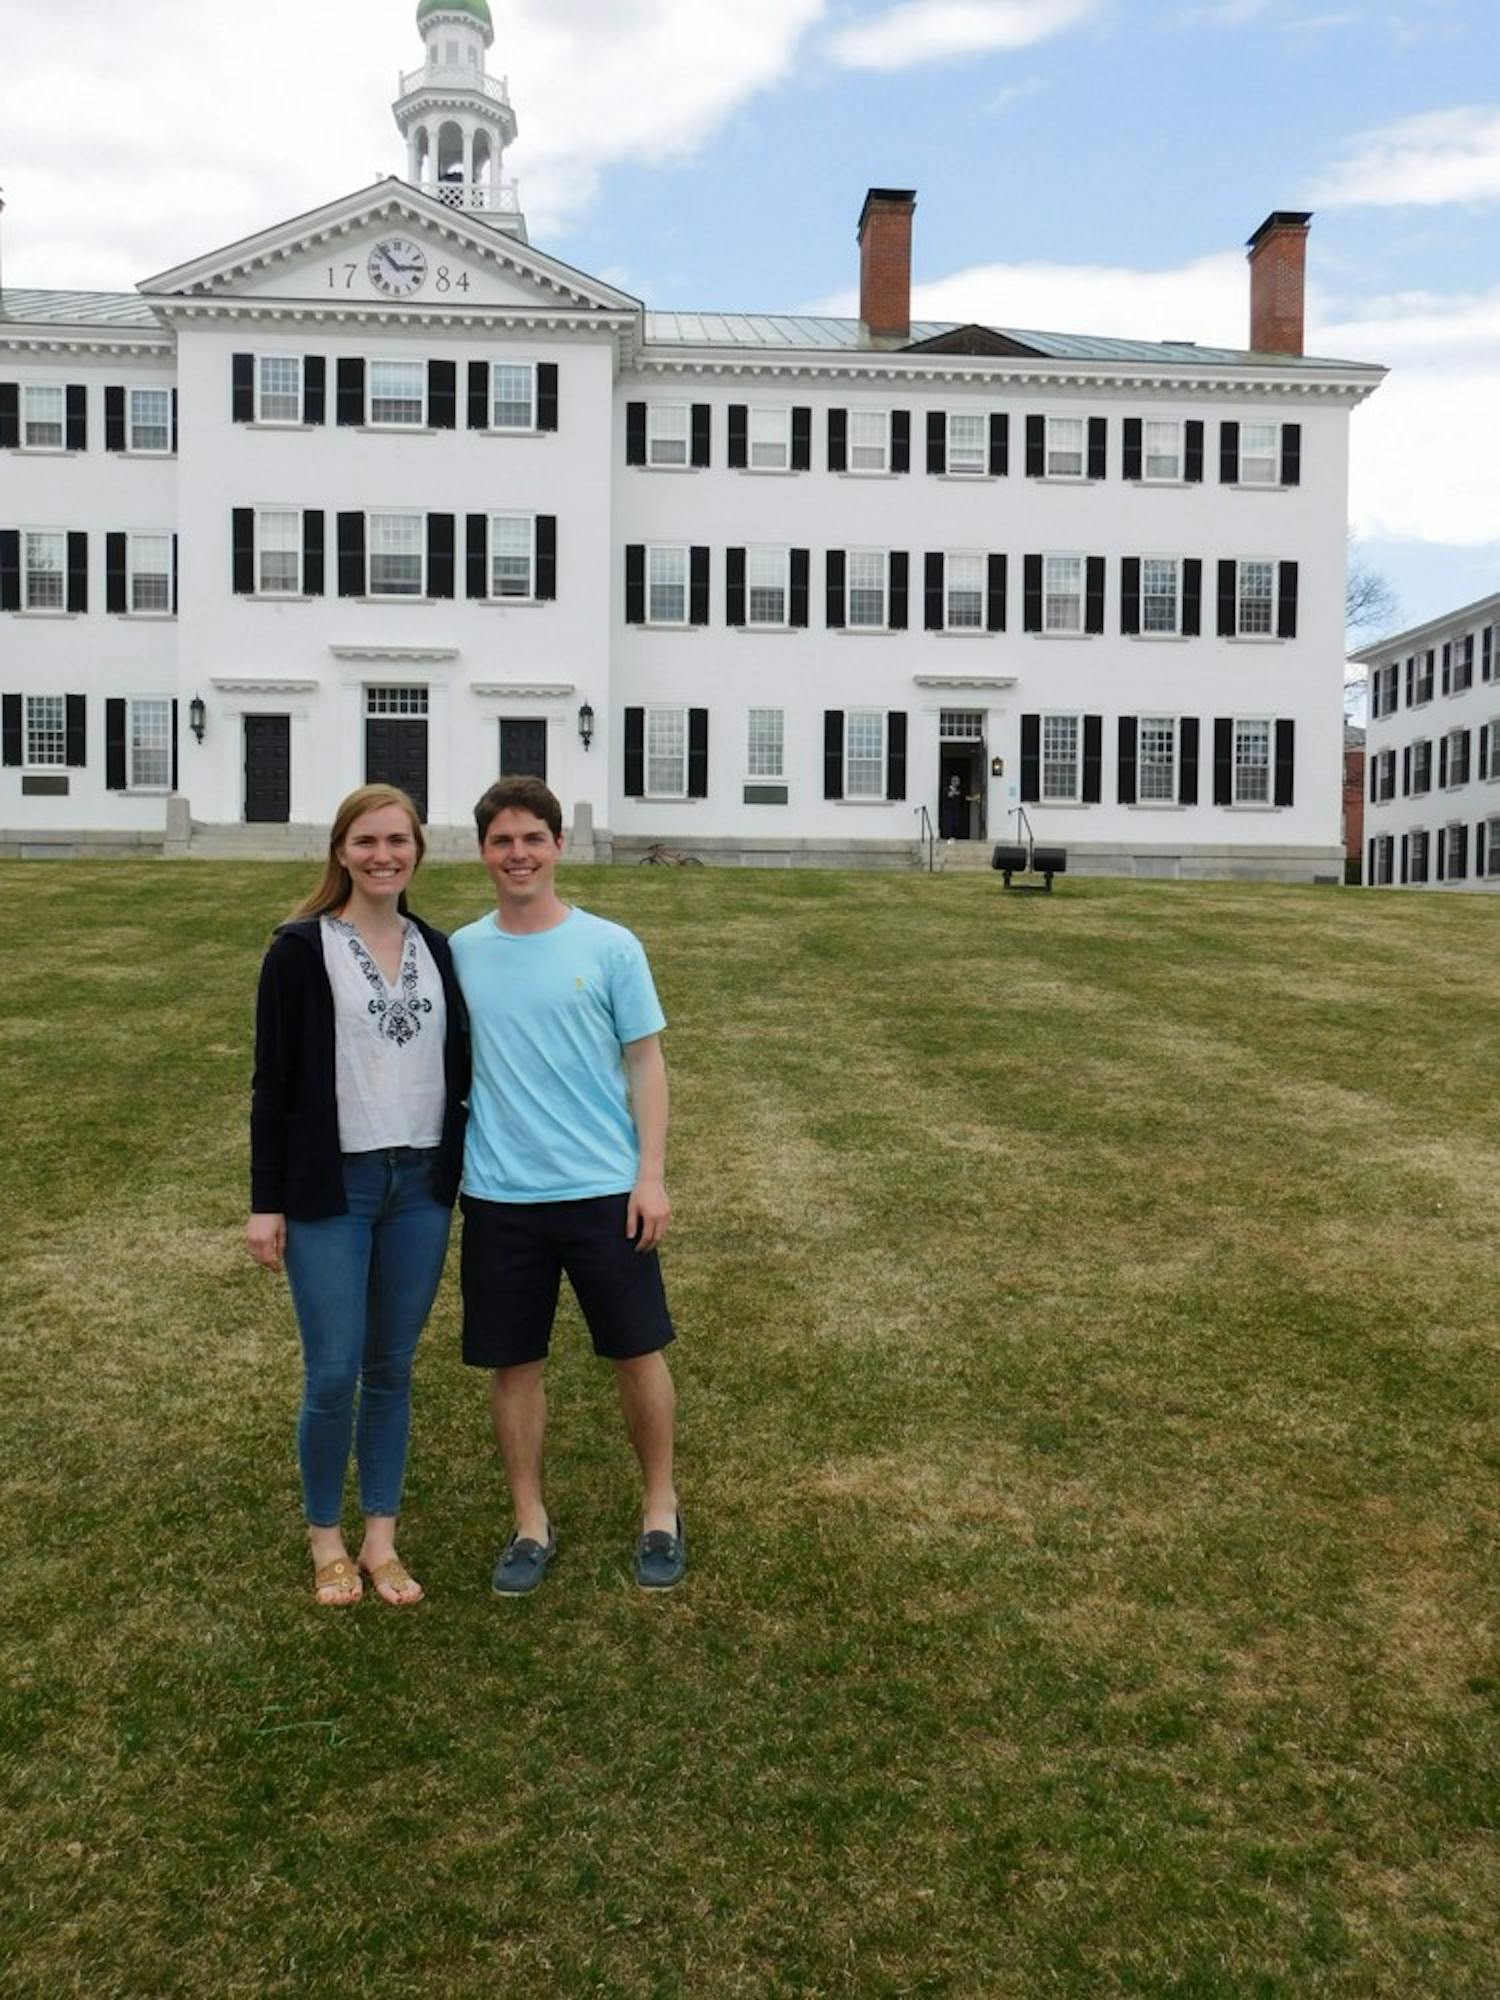 Nick Harrington '17 and Sally Portman '17 were elected as Student Assembly president and vice president.